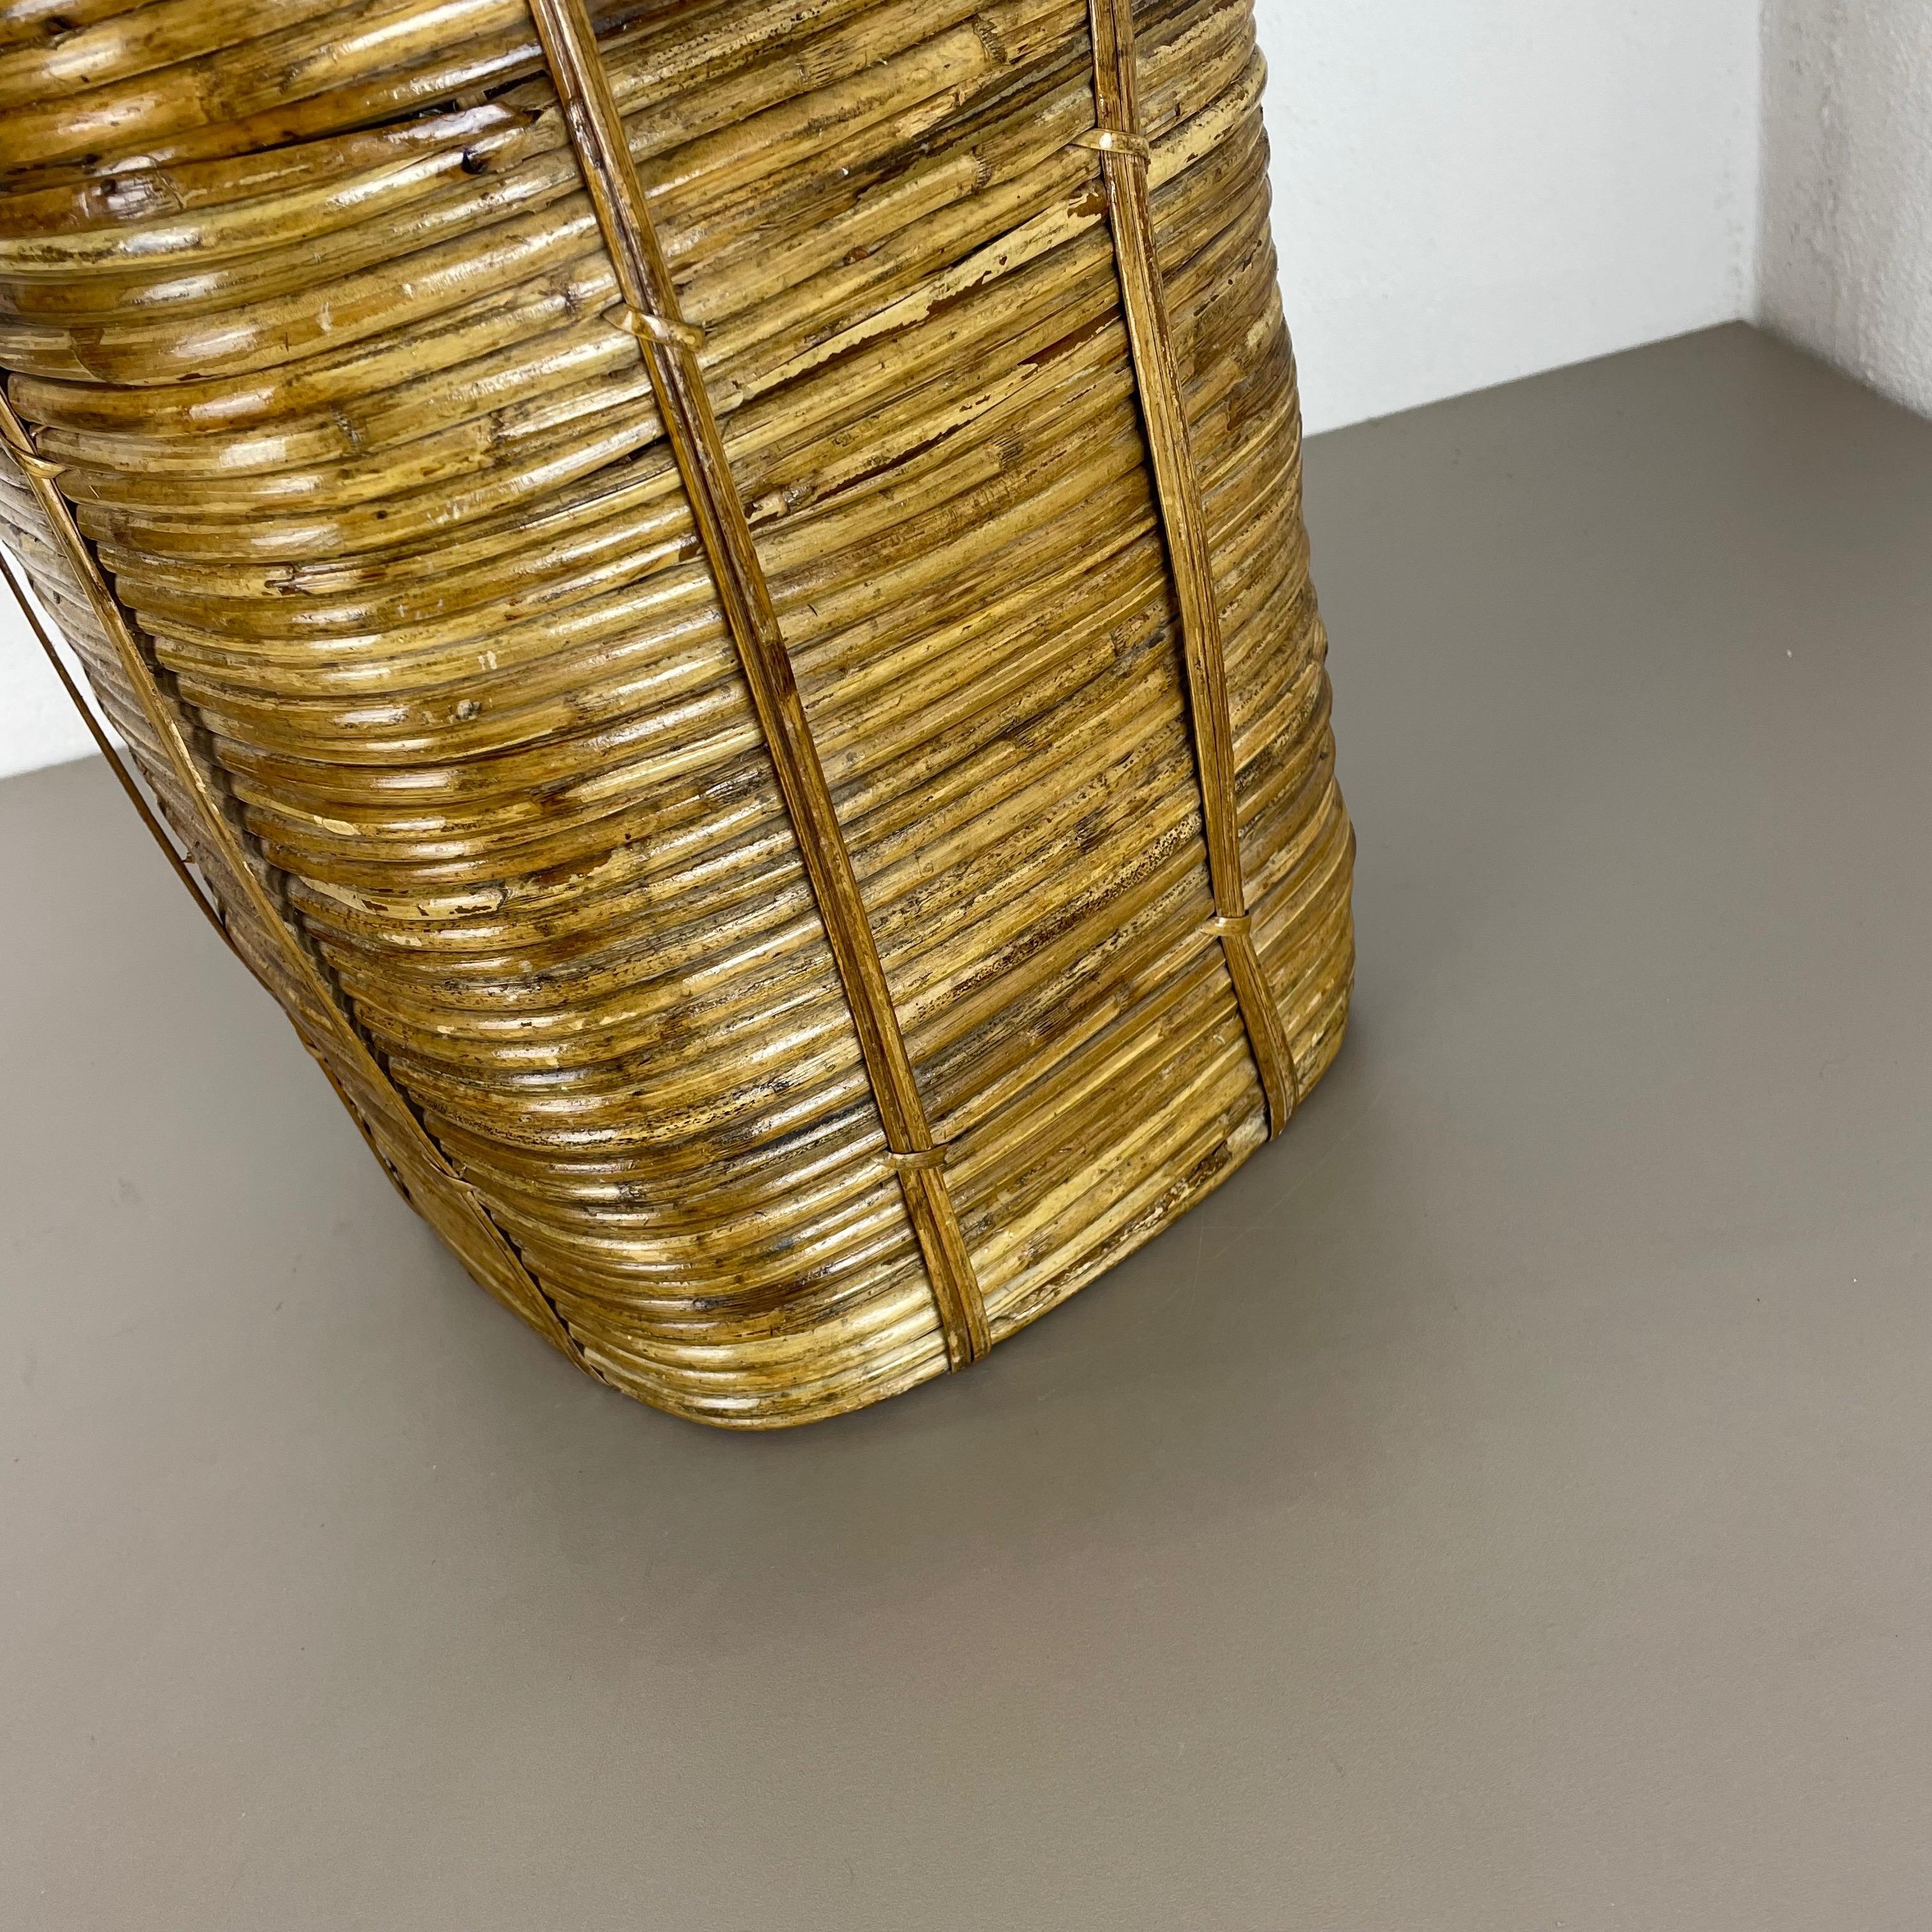 Aubock Style Rattan and Brass Bauhaus Waste Bin, Umbrella Stand, France, 1960s For Sale 6